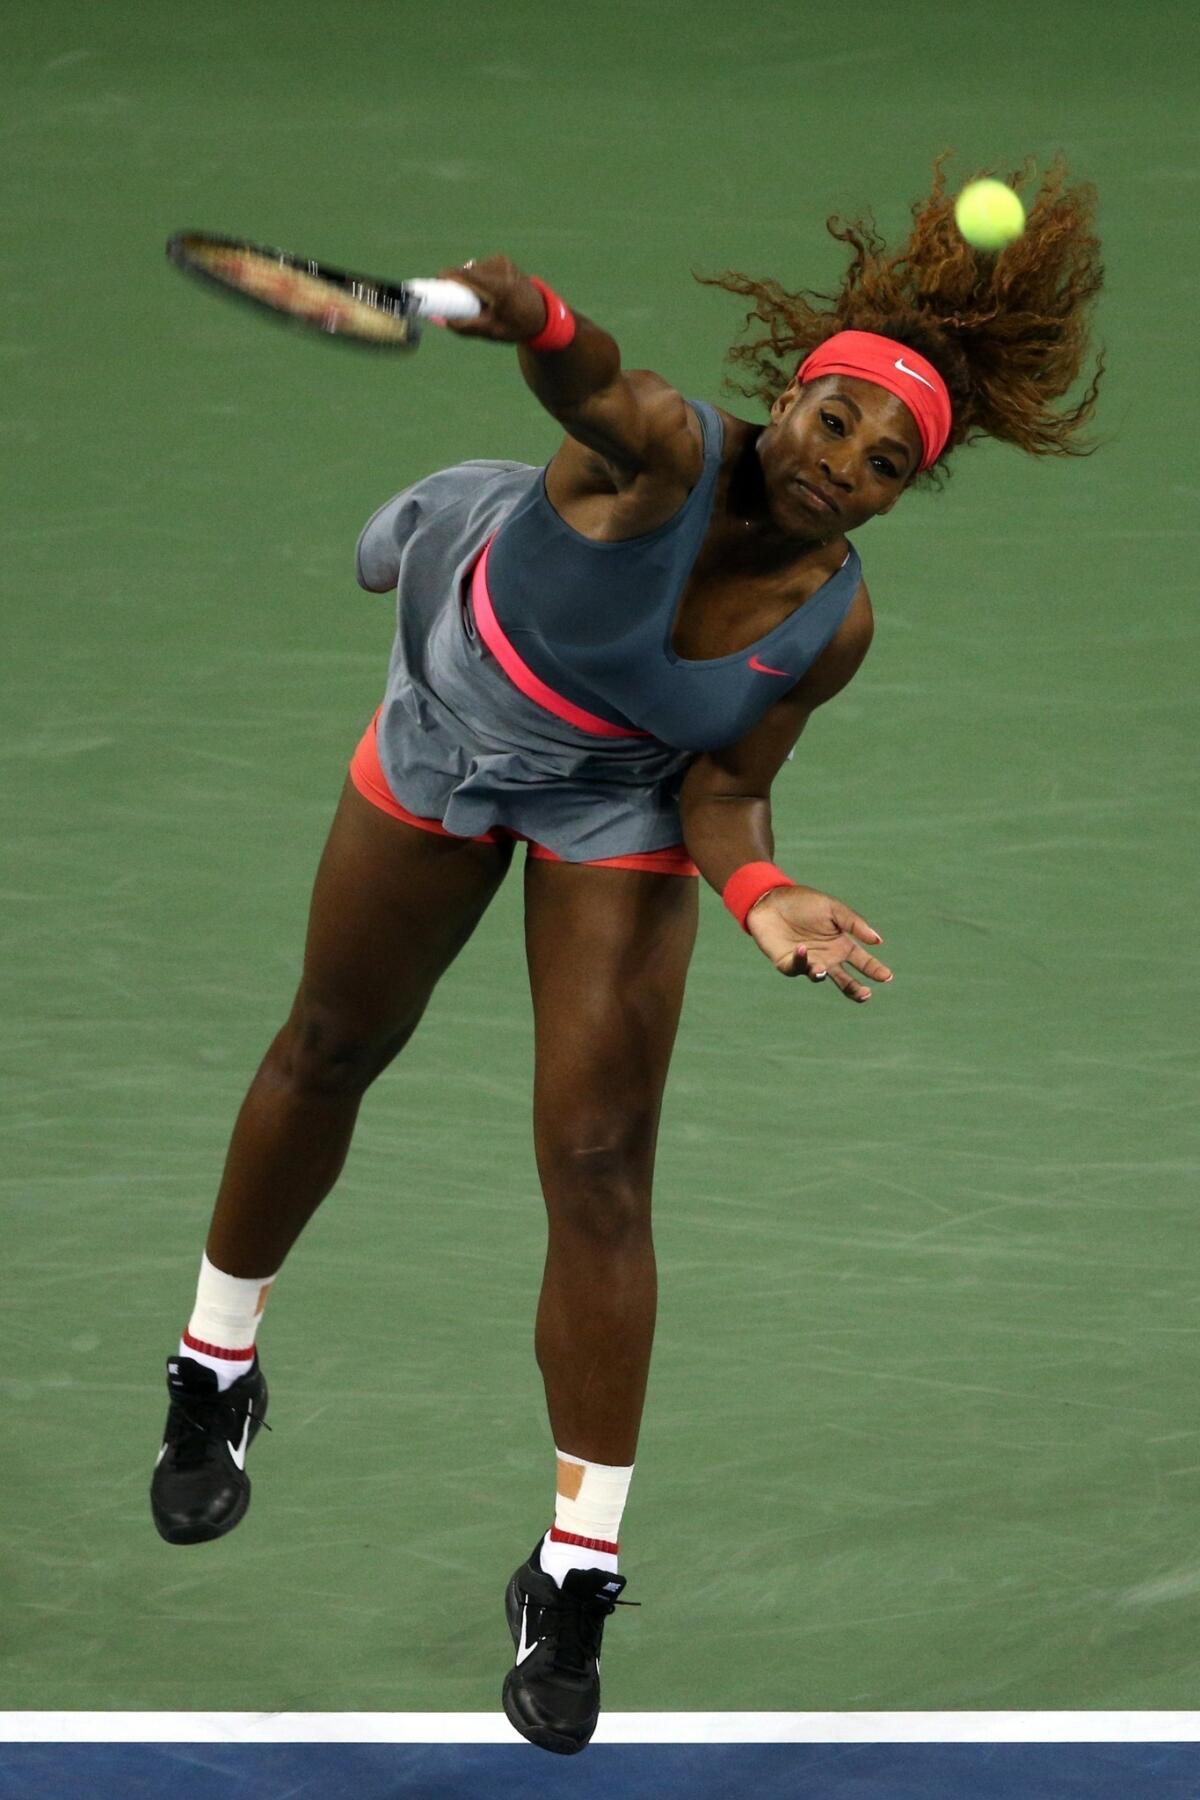 Serena Williams serves during her quarterfinal victory over Carl Suarez Navarro at the U.S. Open on Tuesday.